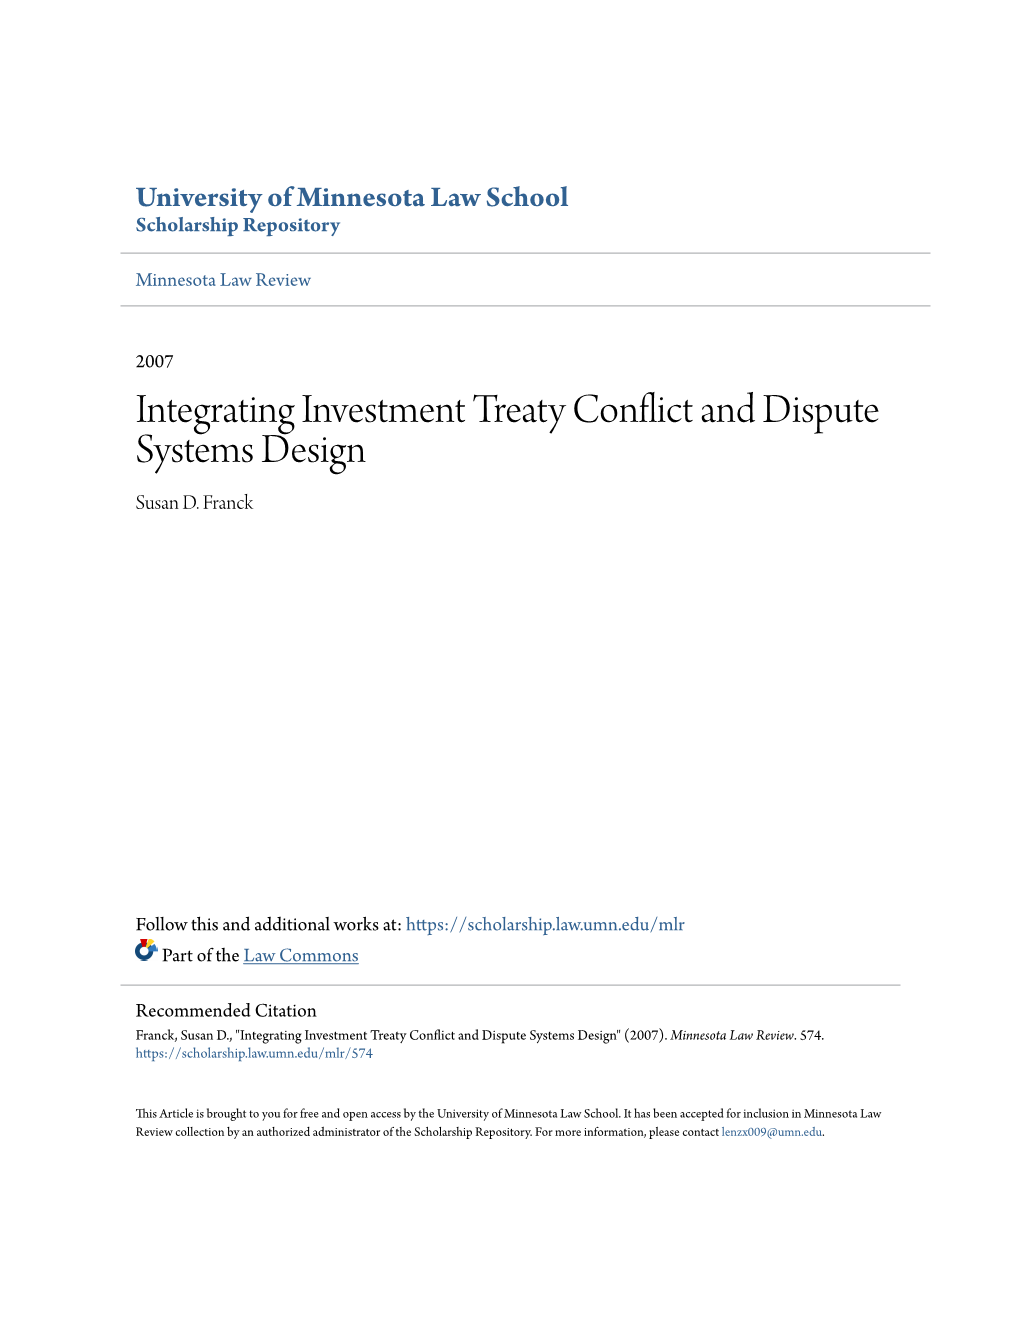 Integrating Investment Treaty Conflict and Dispute Systems Design Susan D